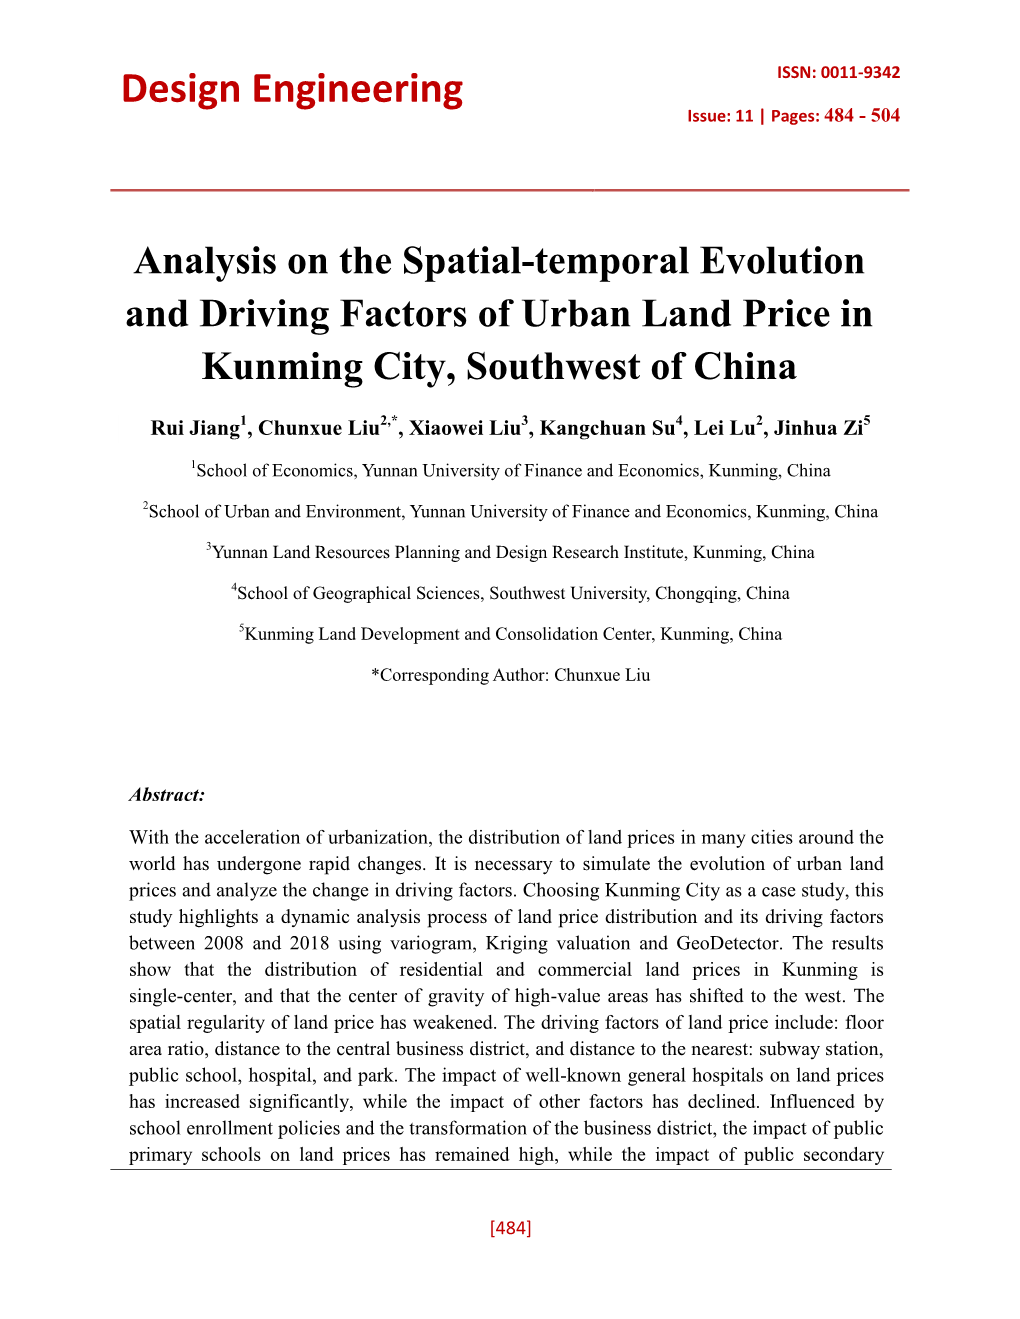 Analysis on the Spatial-Temporal Evolution and Driving Factors of Urban Land Price in Kunming City, Southwest of China